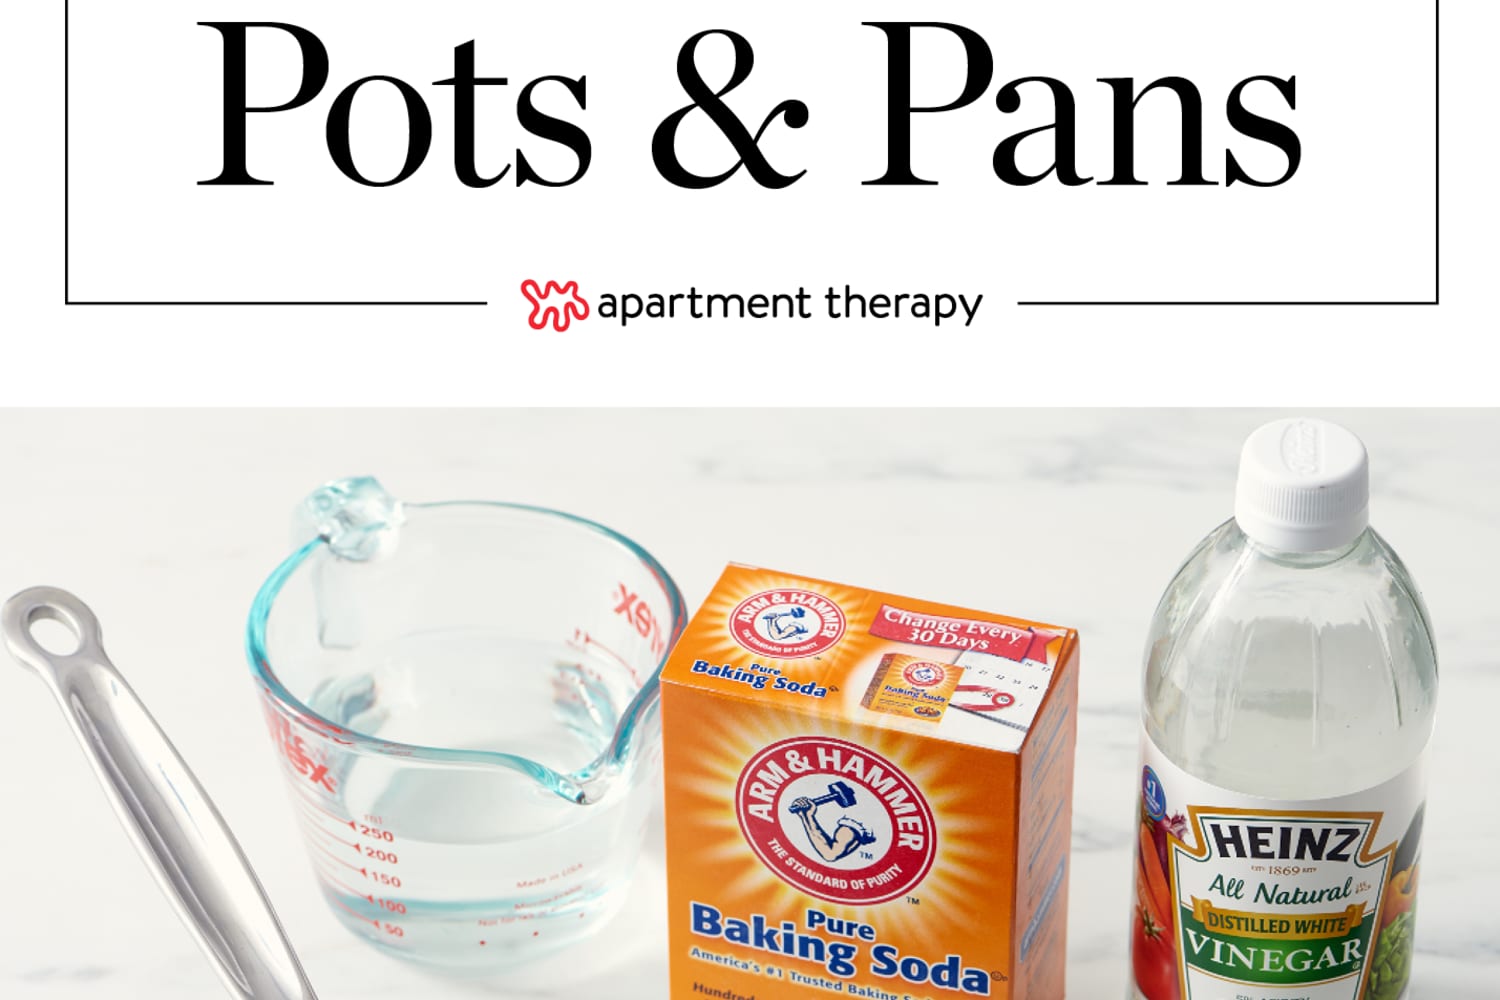 How to Clean Pans With Baking Soda